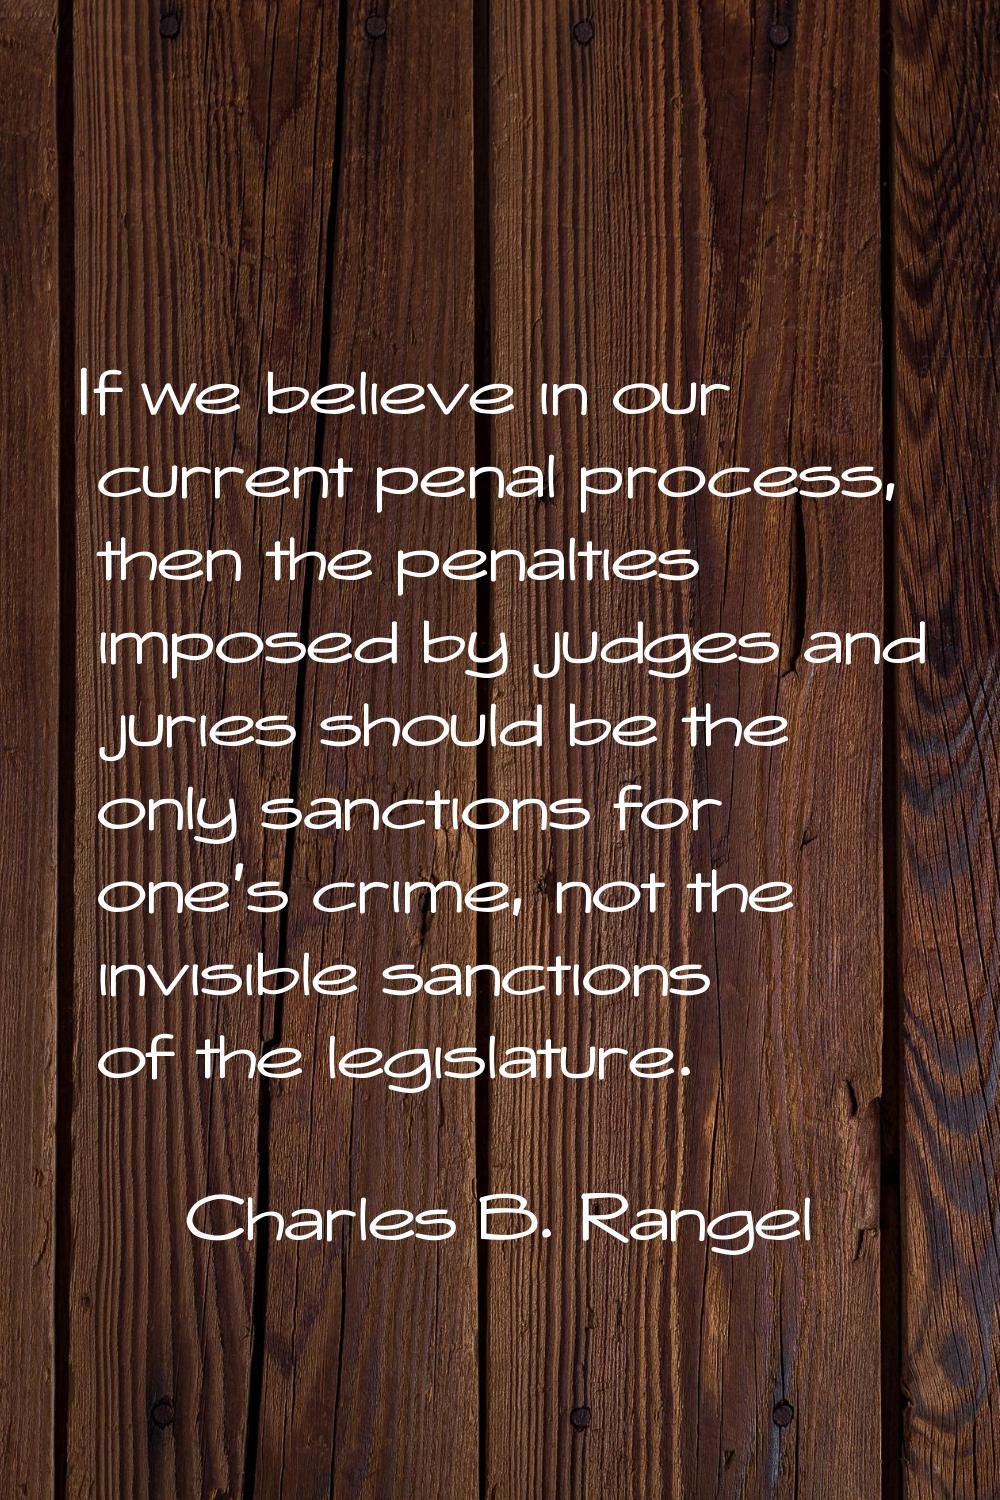 If we believe in our current penal process, then the penalties imposed by judges and juries should 